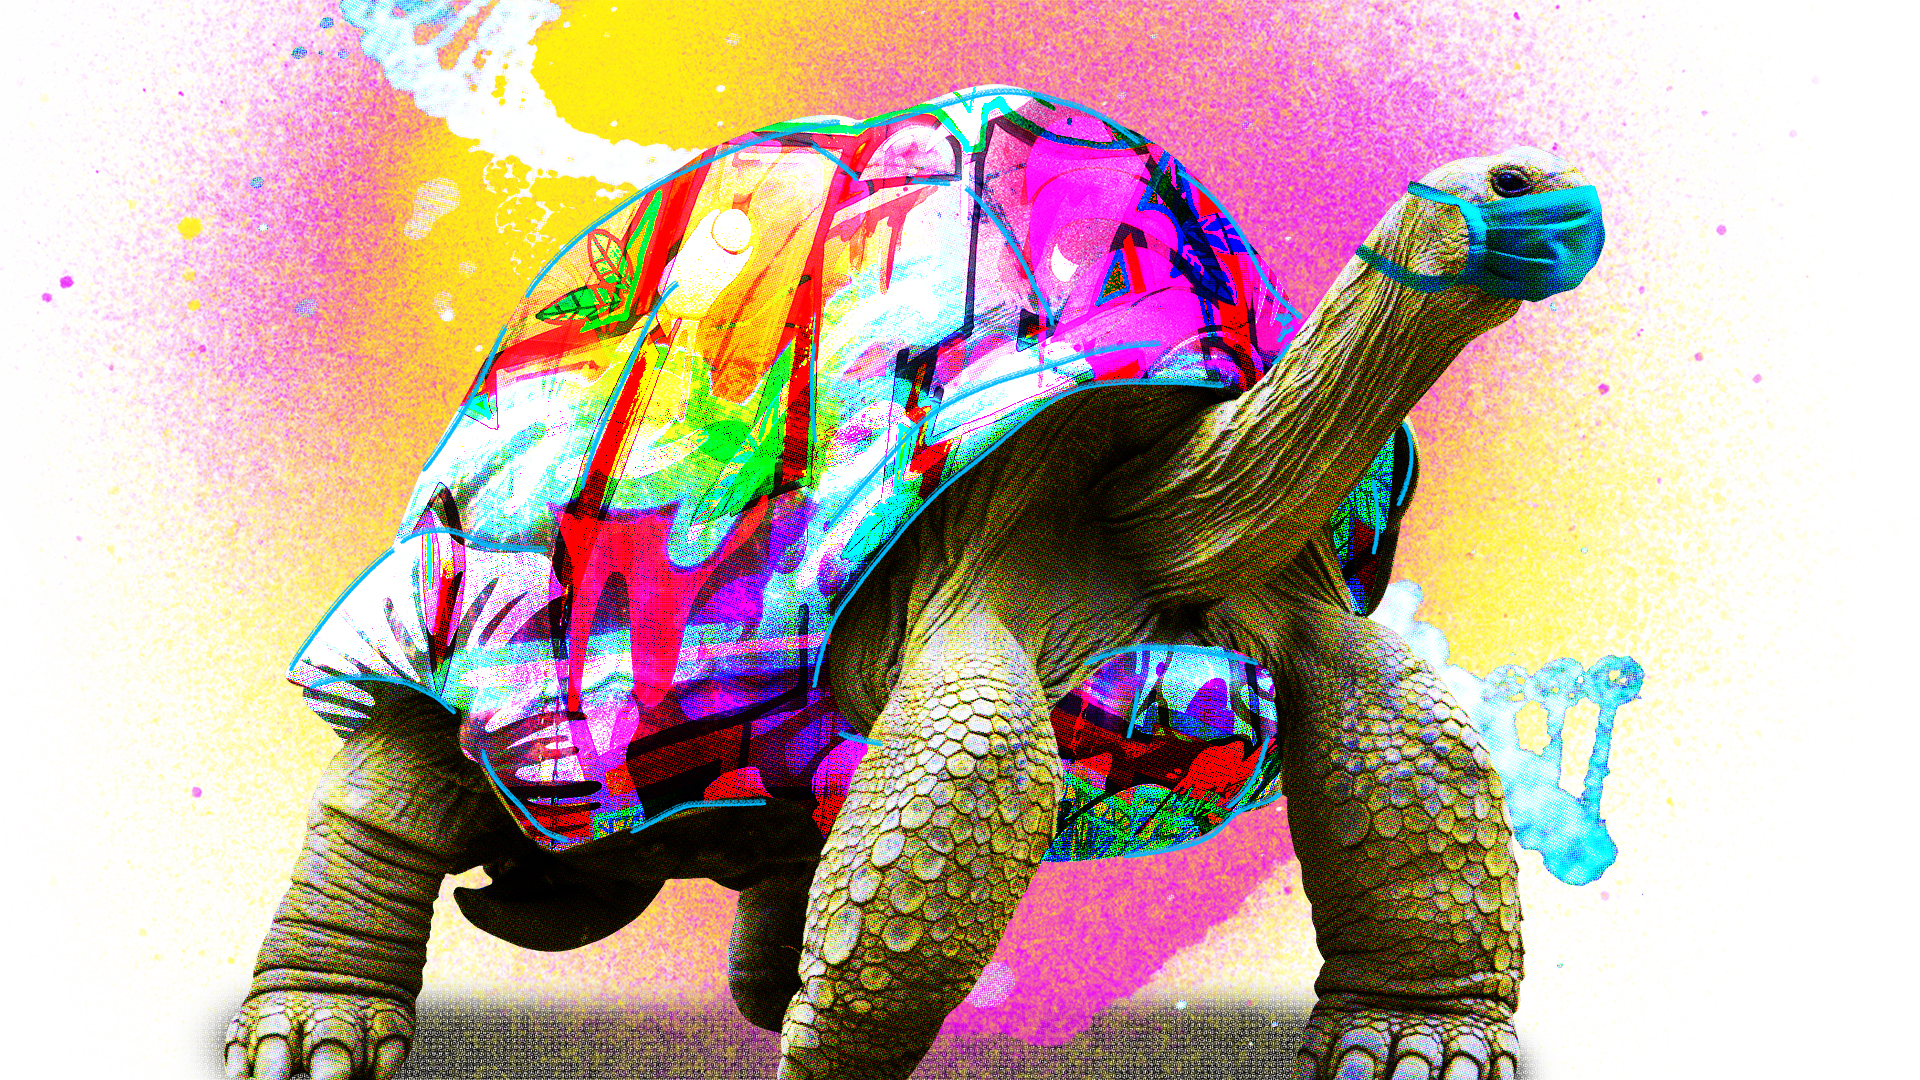 tortoise with wings wearing mask. Andrew Steele says anti-ageing drugs can prepare us for future pandemics